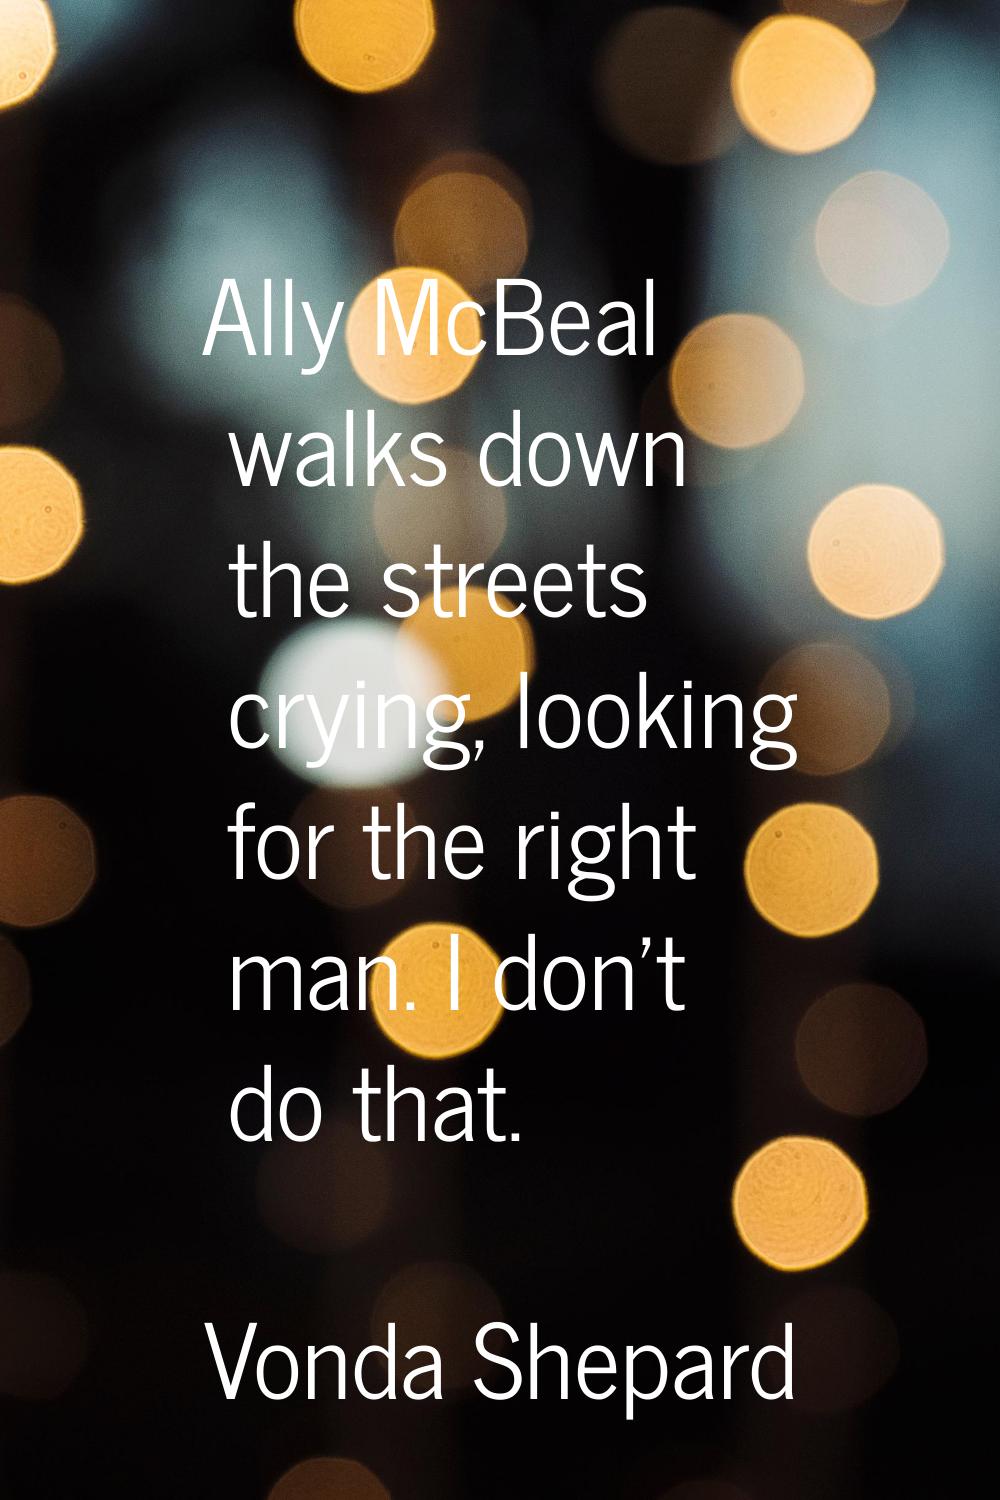 Ally McBeal walks down the streets crying, looking for the right man. I don't do that.